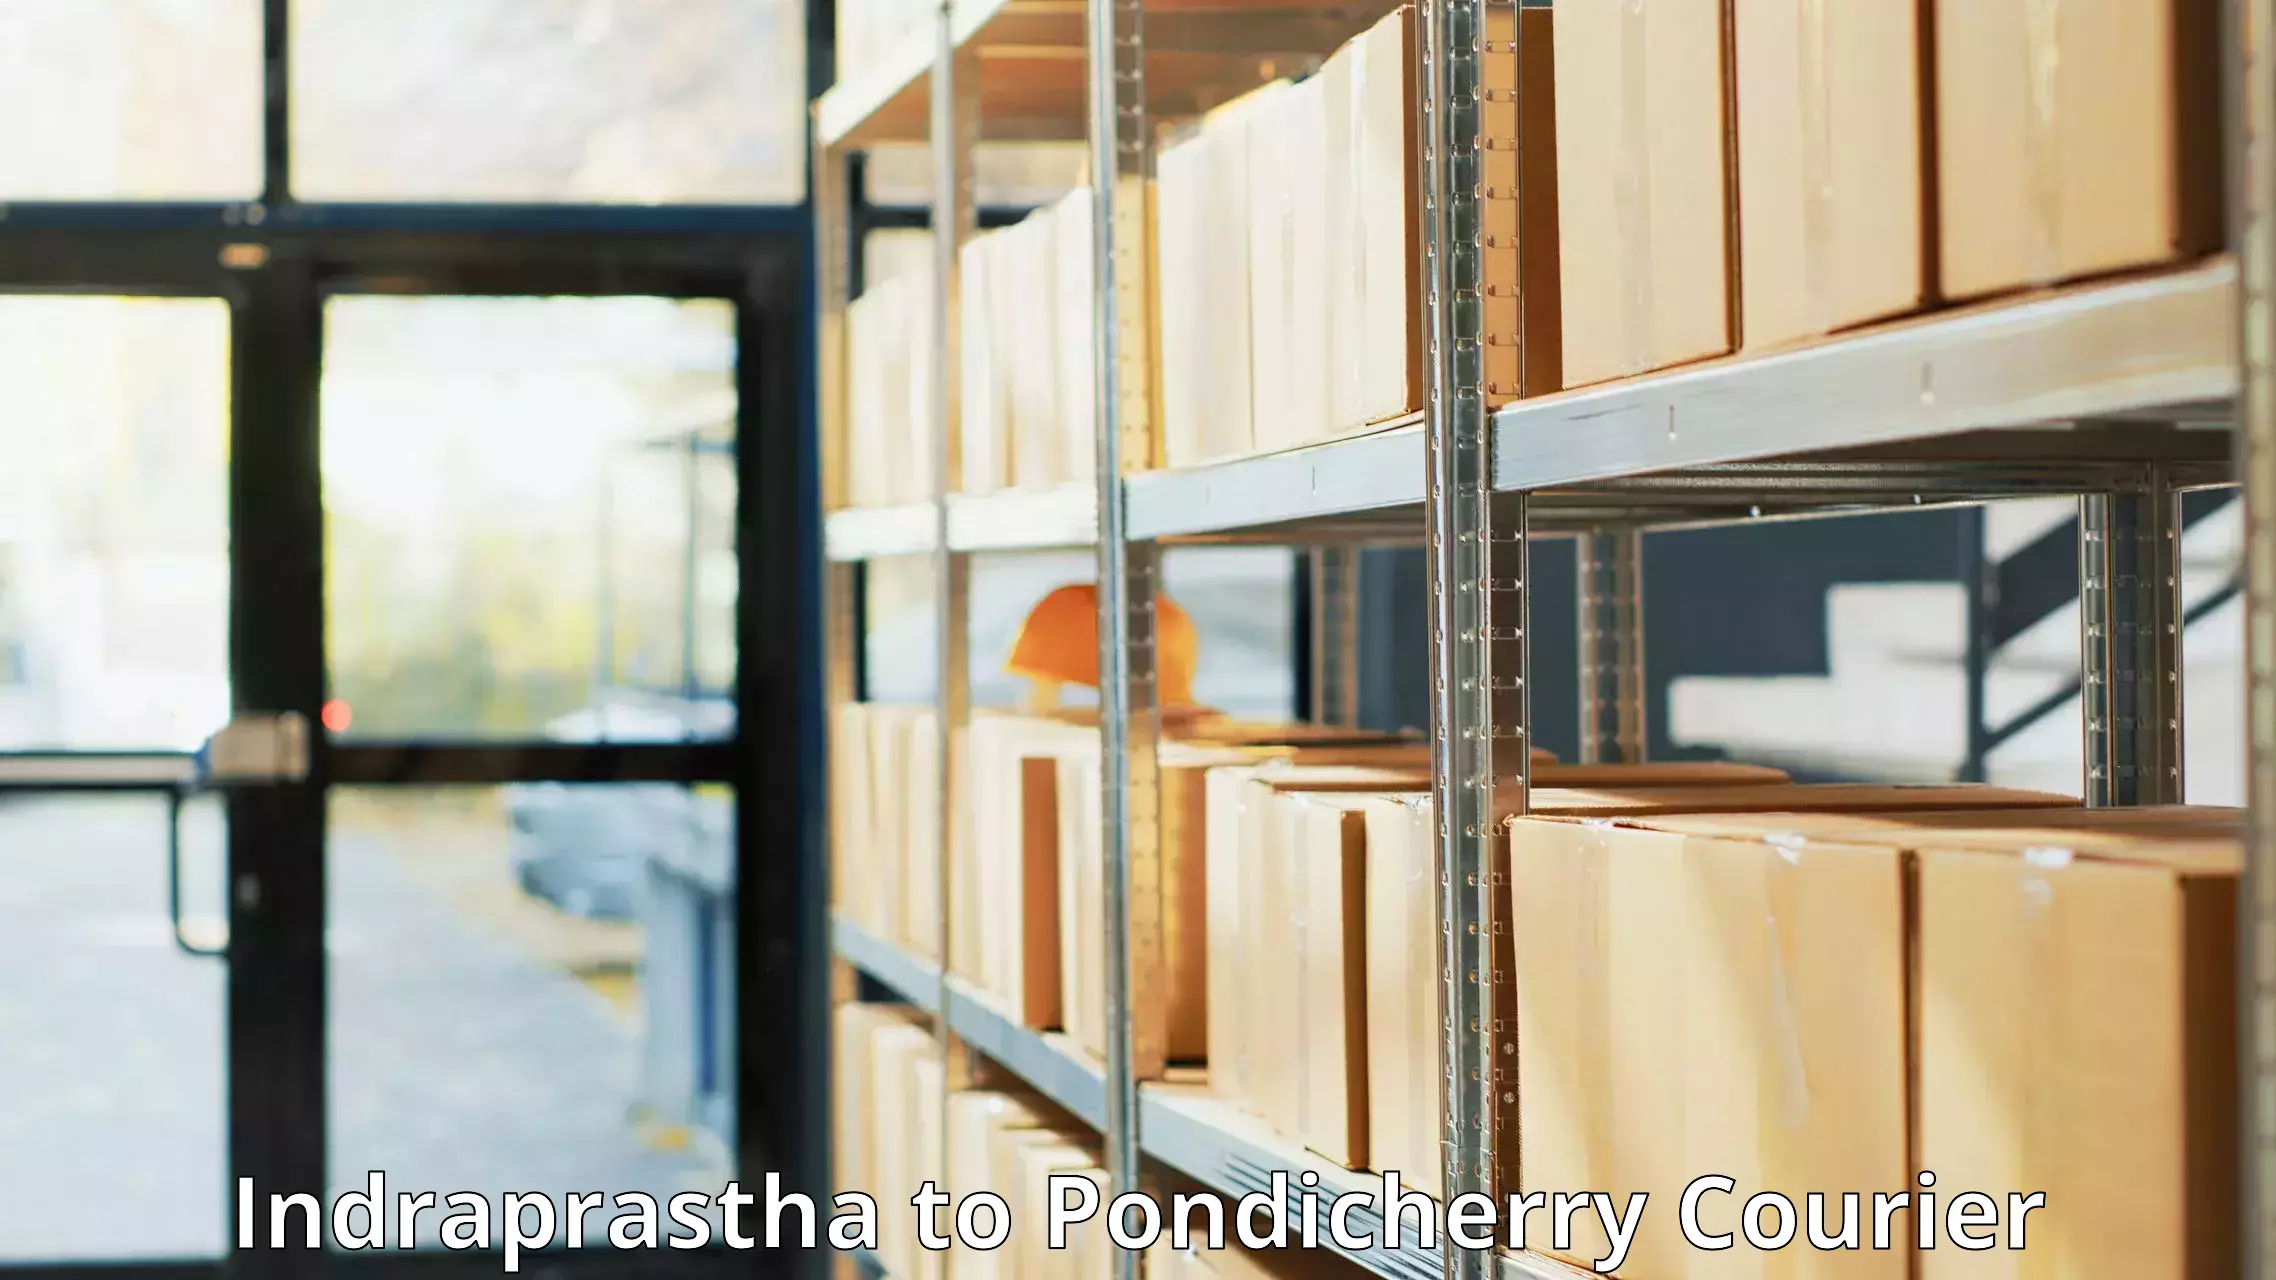 Parcel service for businesses Indraprastha to Pondicherry